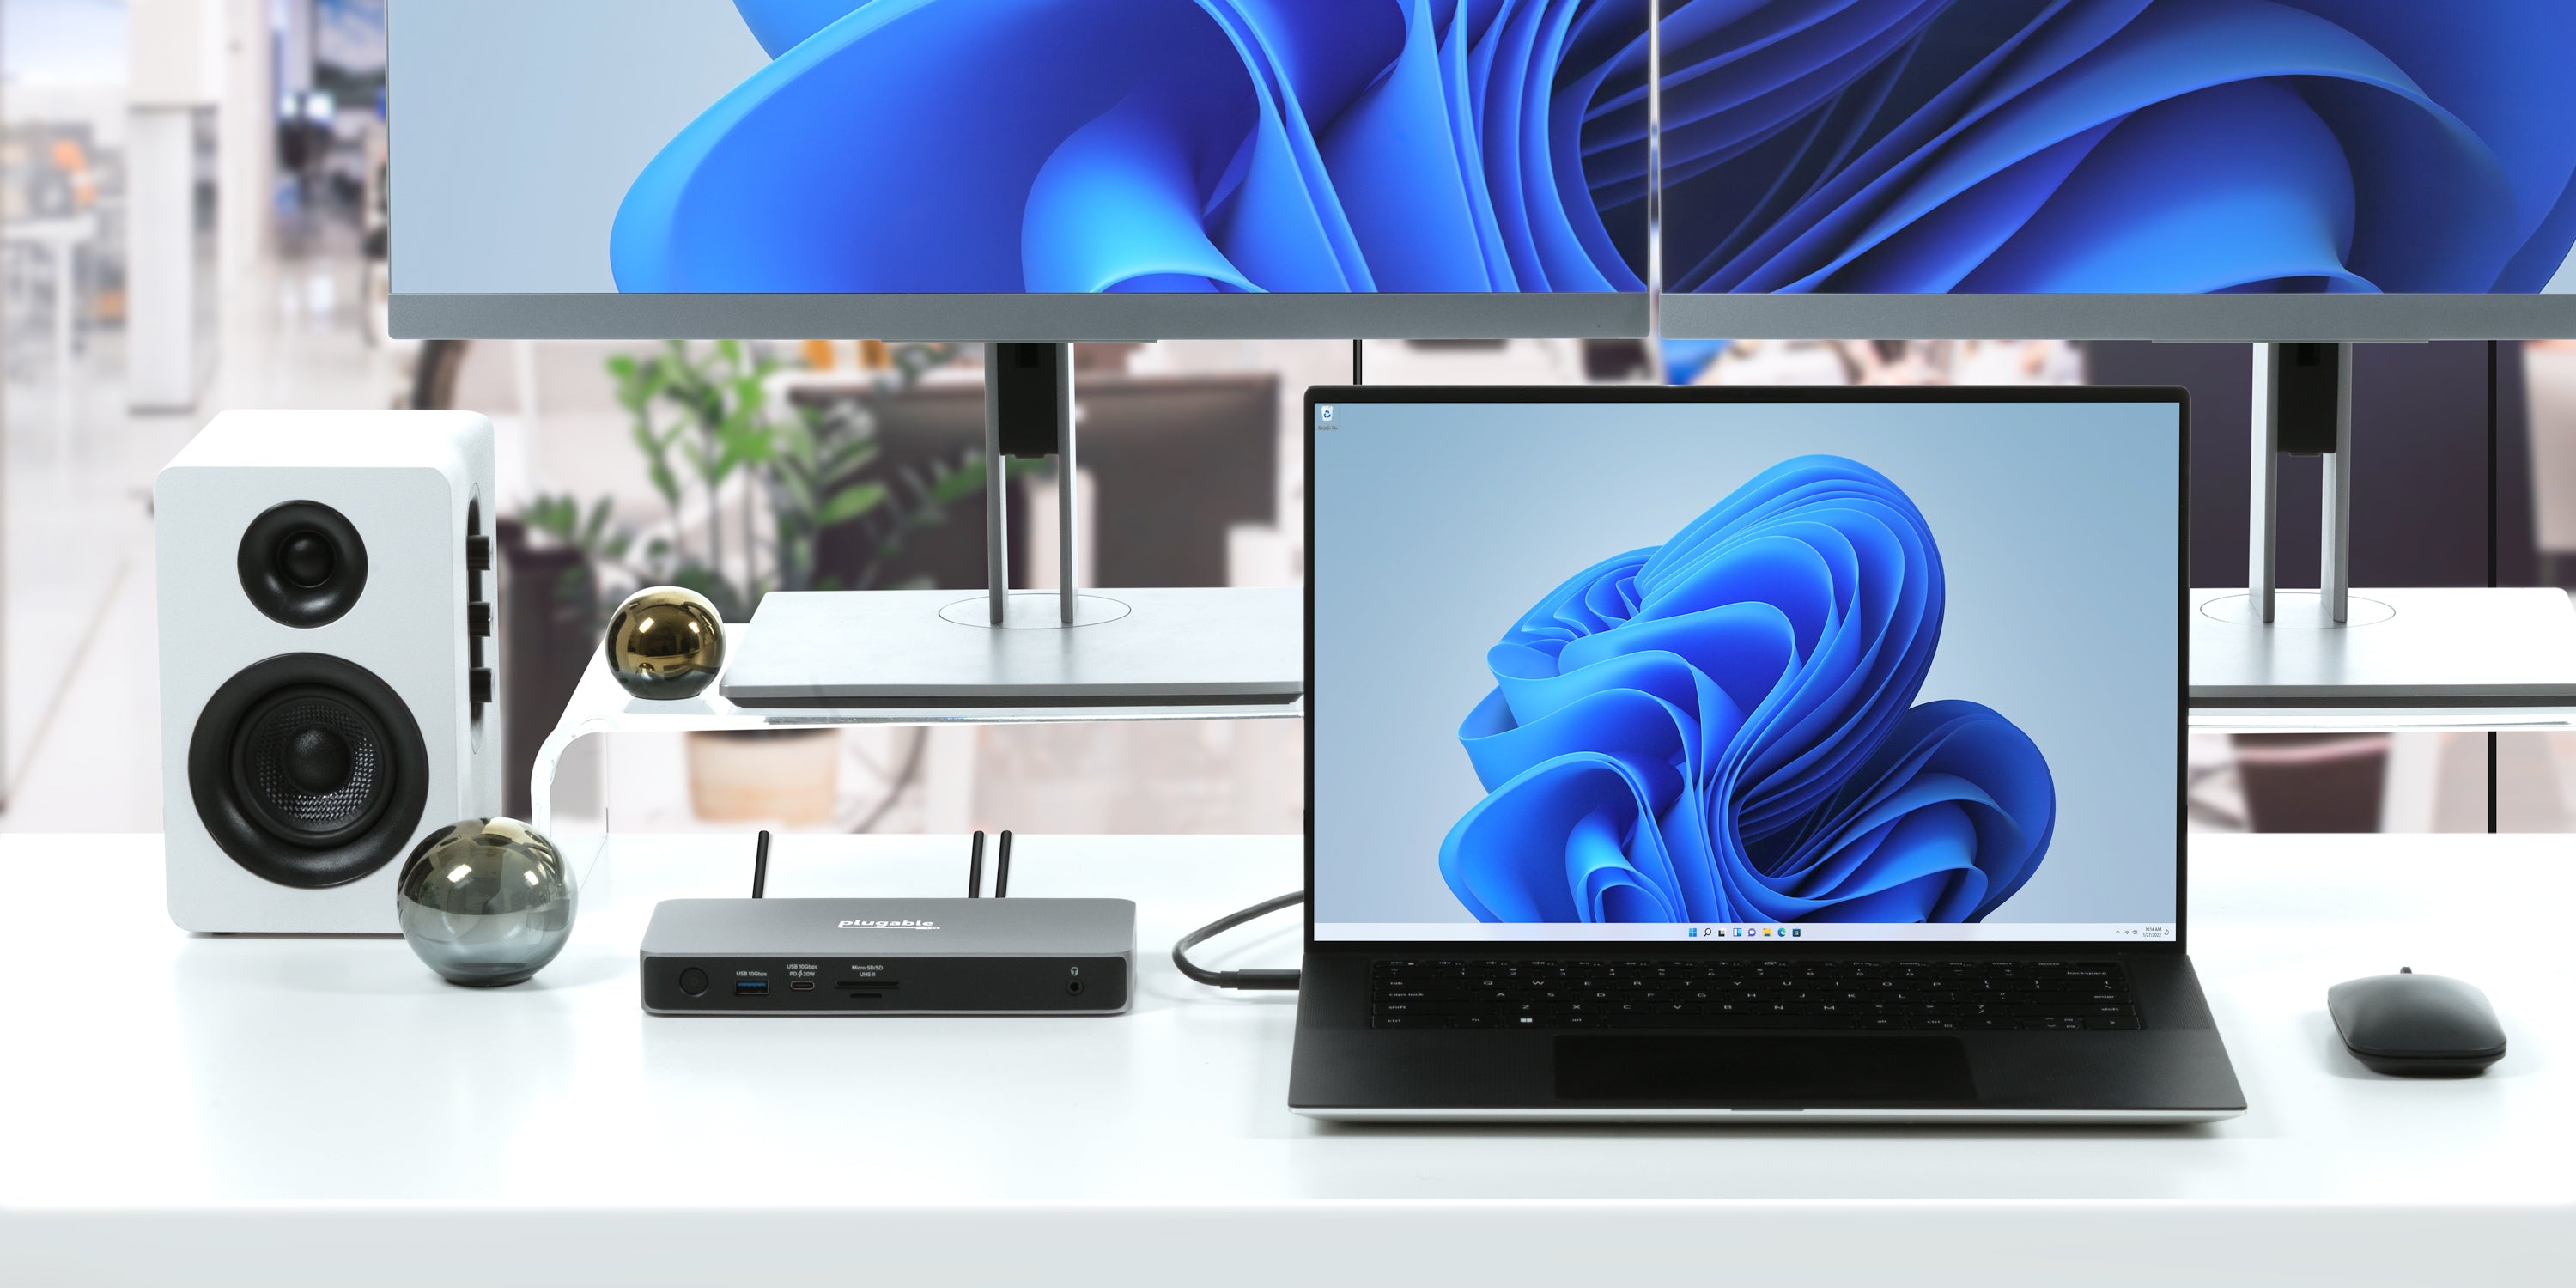 USB4 Dock Delivers Dazzling Dual 4K Display – Plugable Technologies